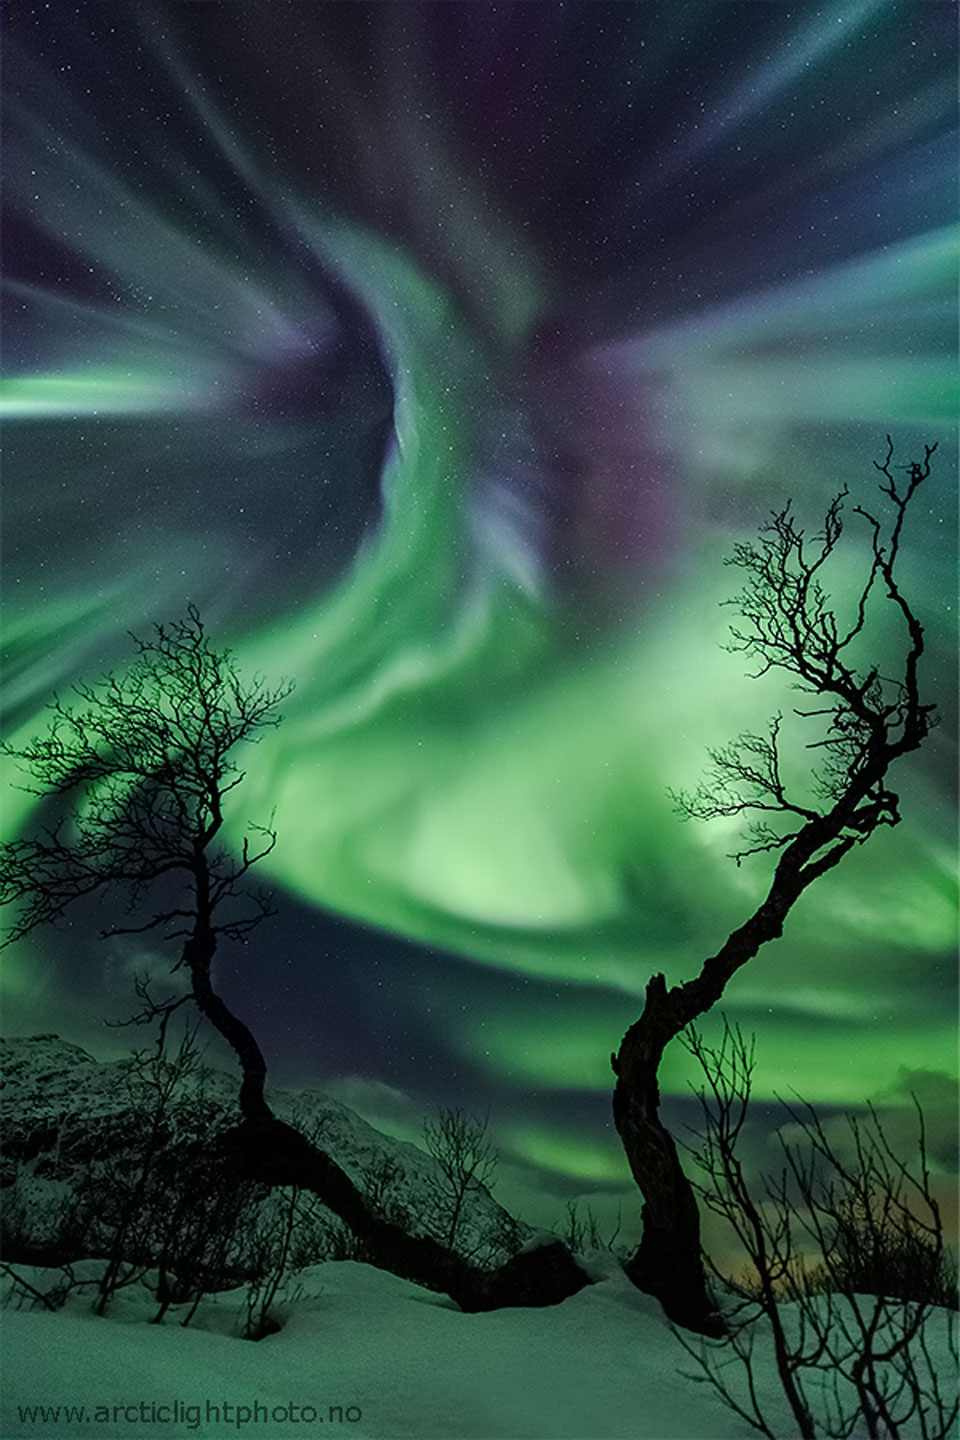 The night sky over a snowy tree-adorned landscape glows
in green and purple. The auroral glow might appear to some to
be shaped like a creature. 
Please see the explanation for more detailed information.